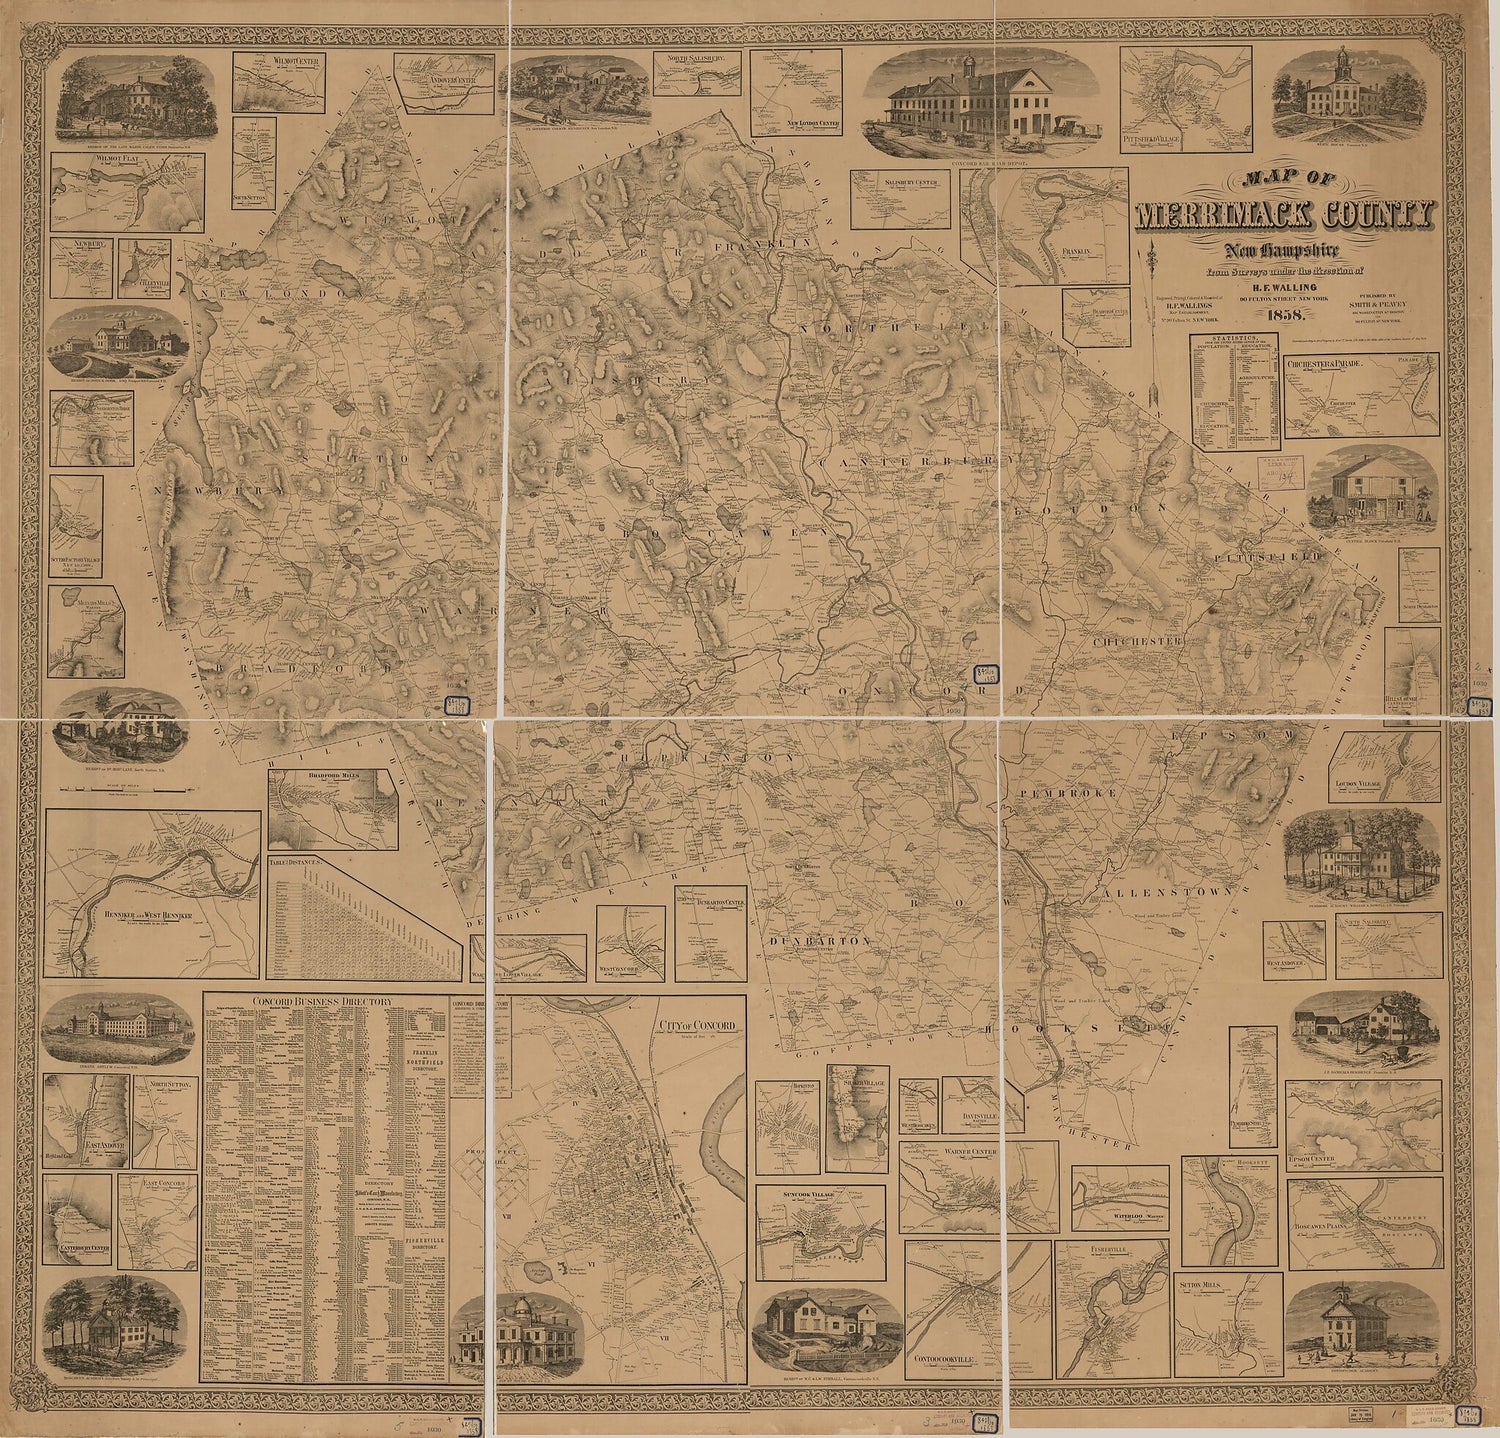 This old map of Map of Merrimack County, New Hampshire from 1858 was created by  H.F. Walling&